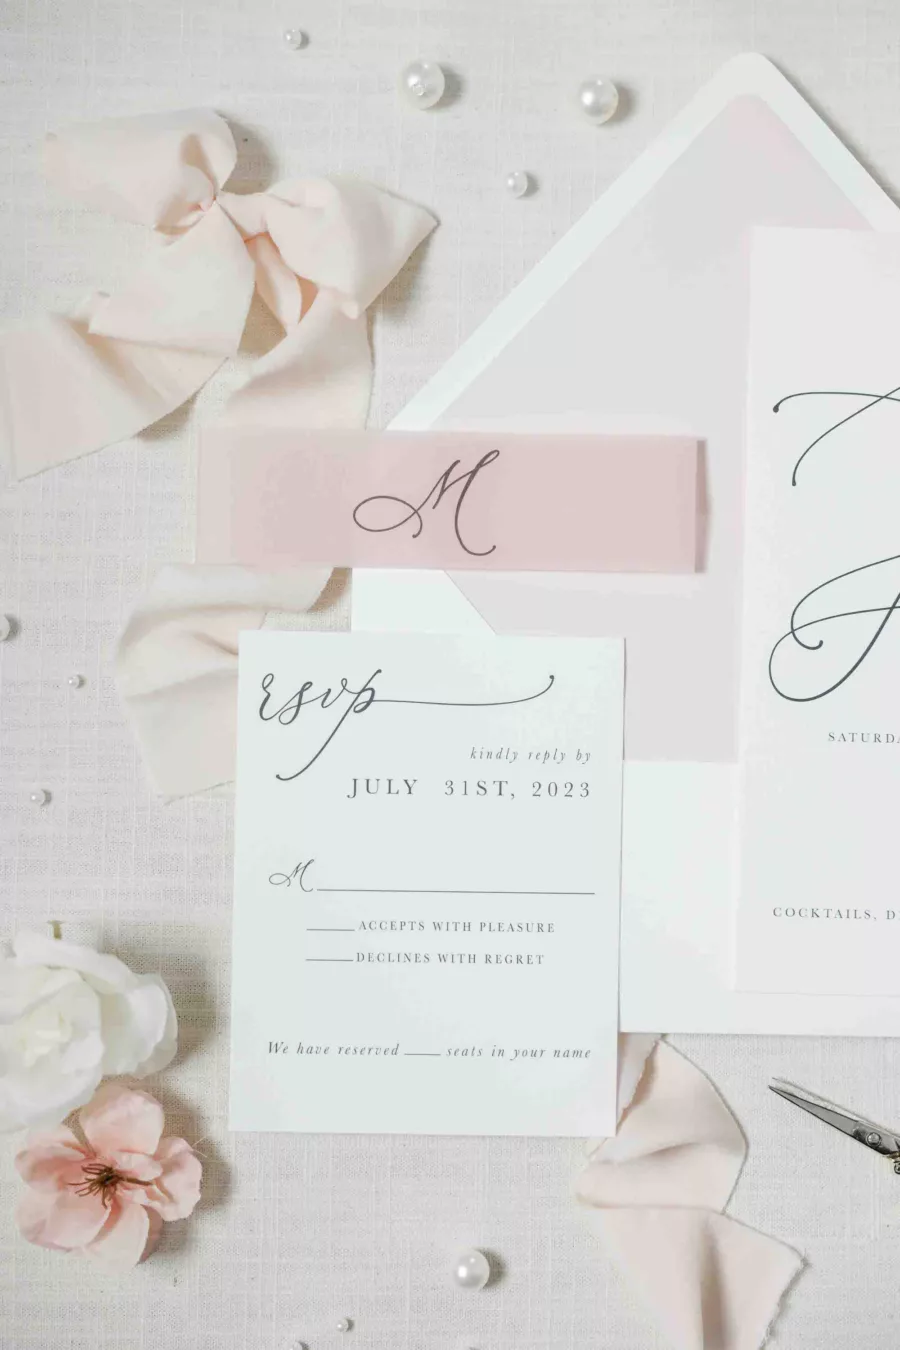 Classic Black and White Wedding RSVP Card Inspiration